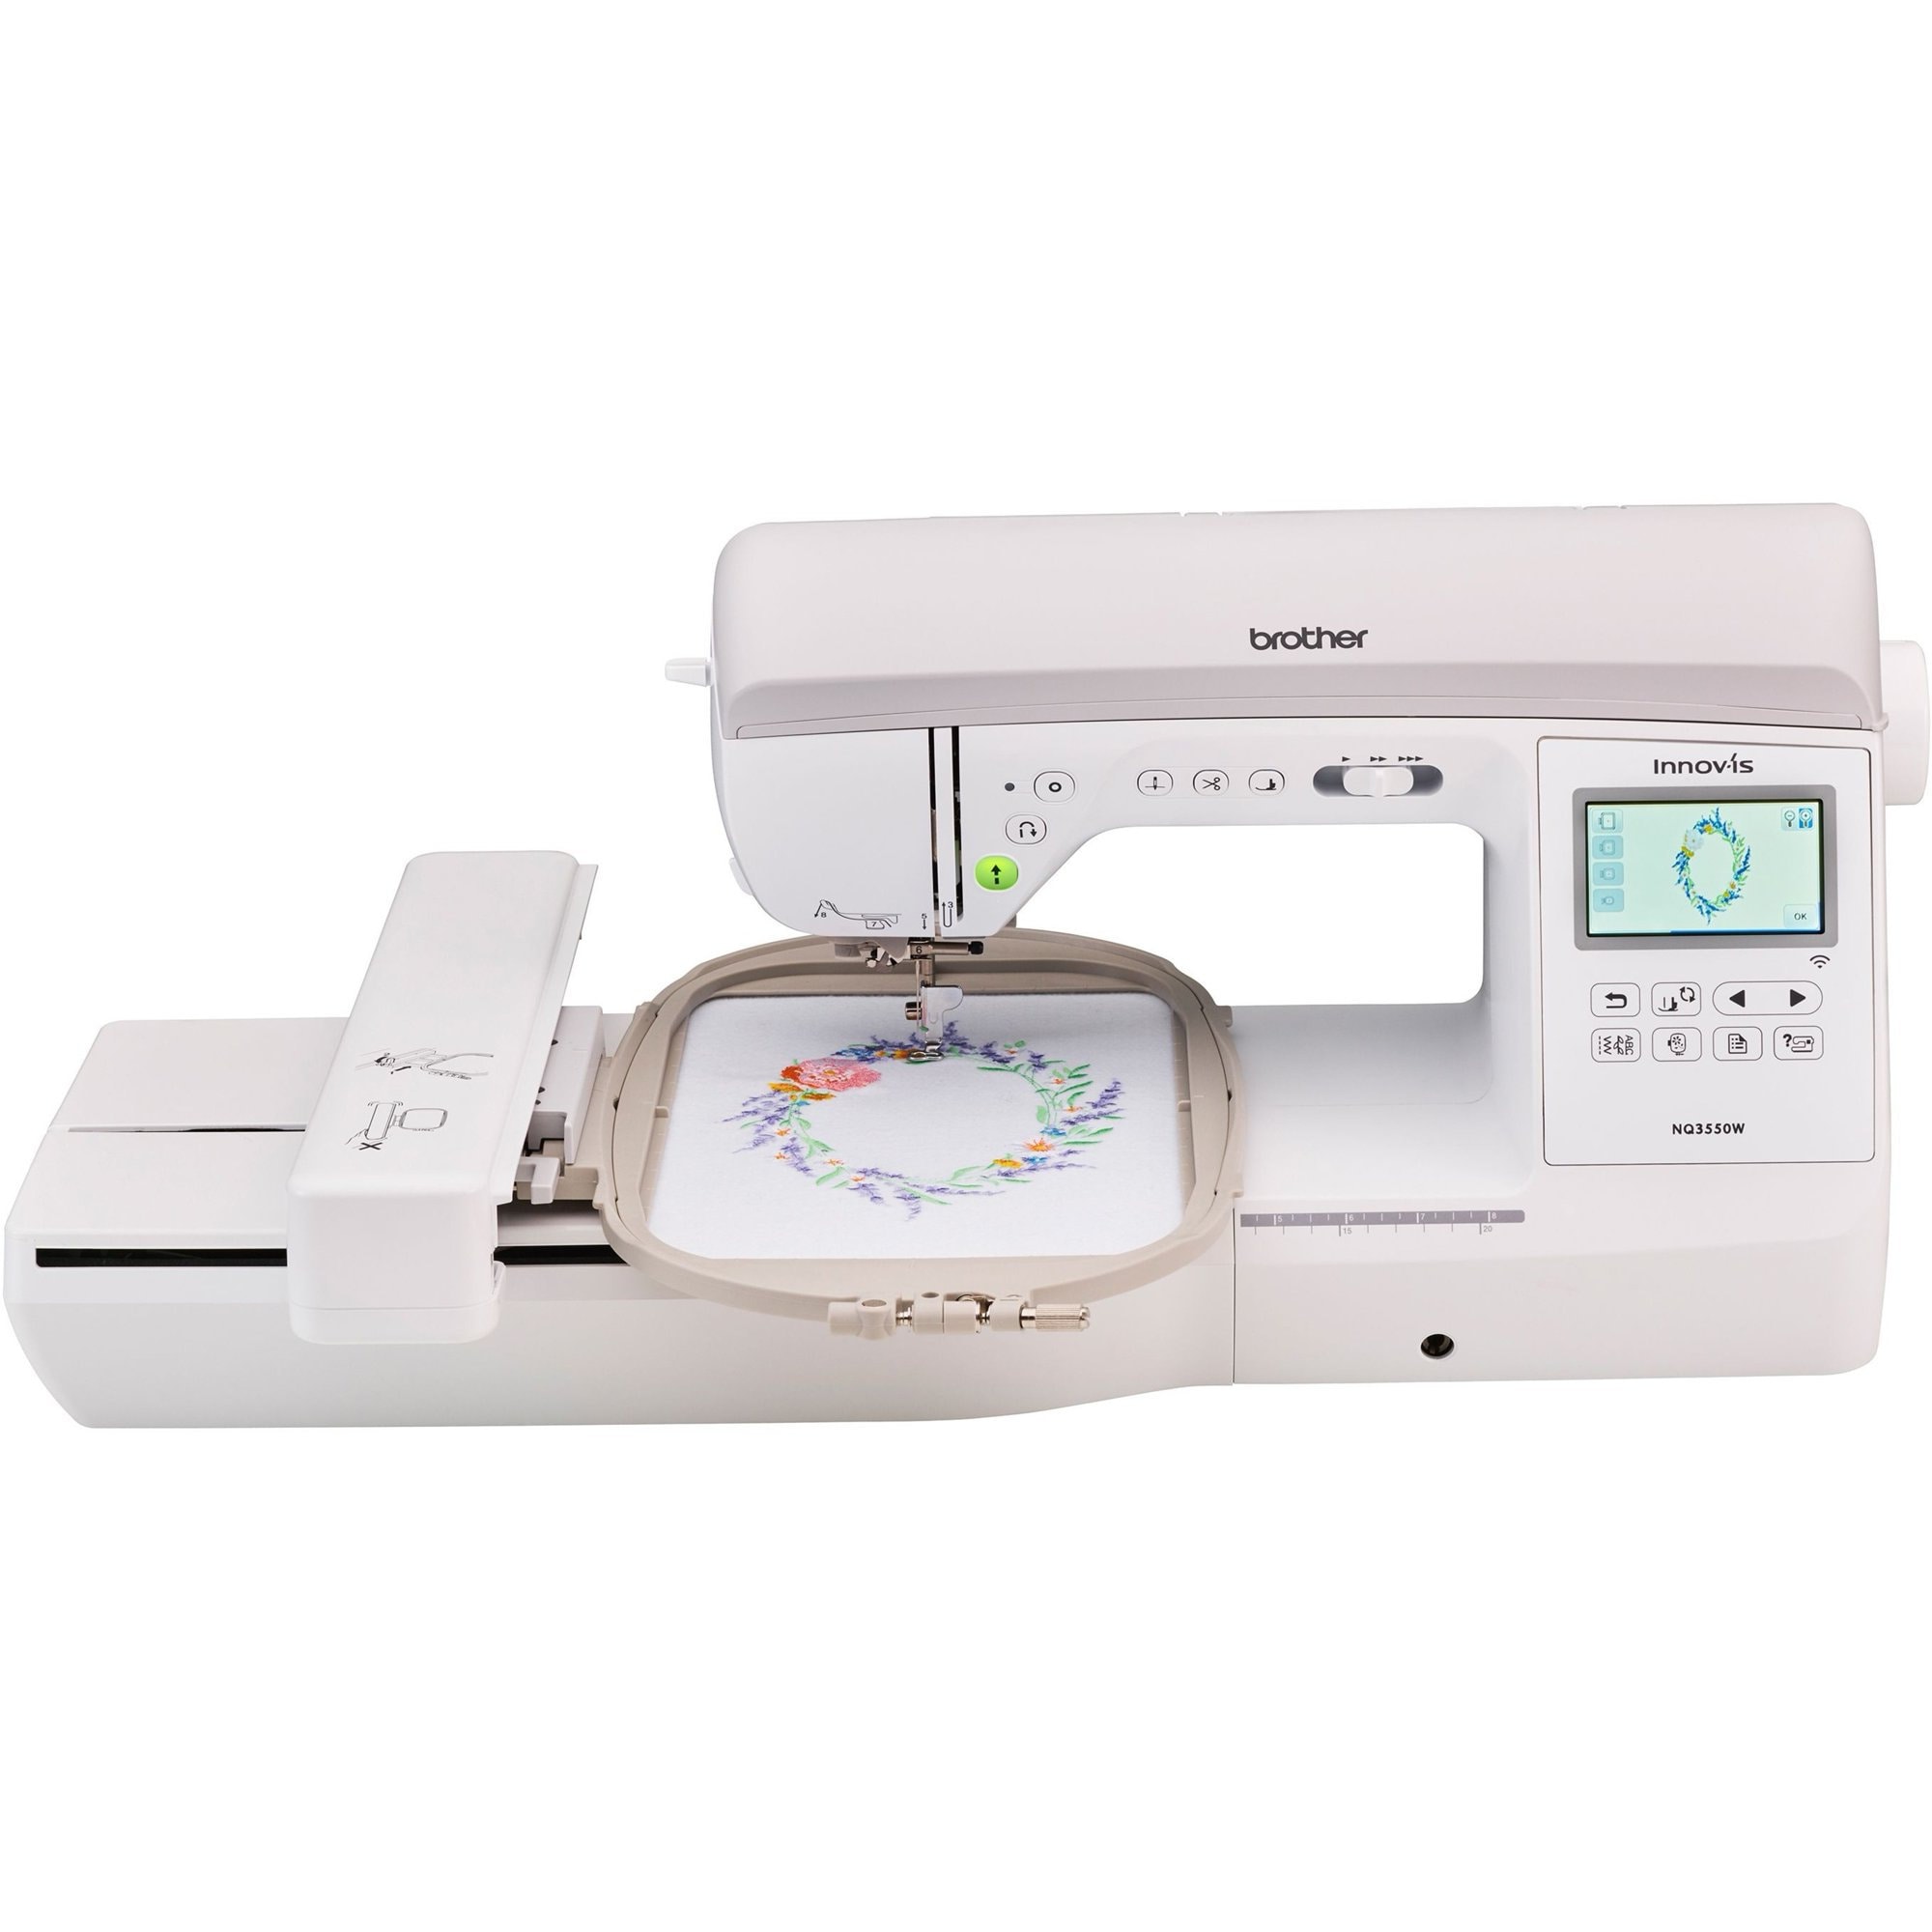 Bernette B79 Yaya Han Special Edition Sewing and Embroidery Machine